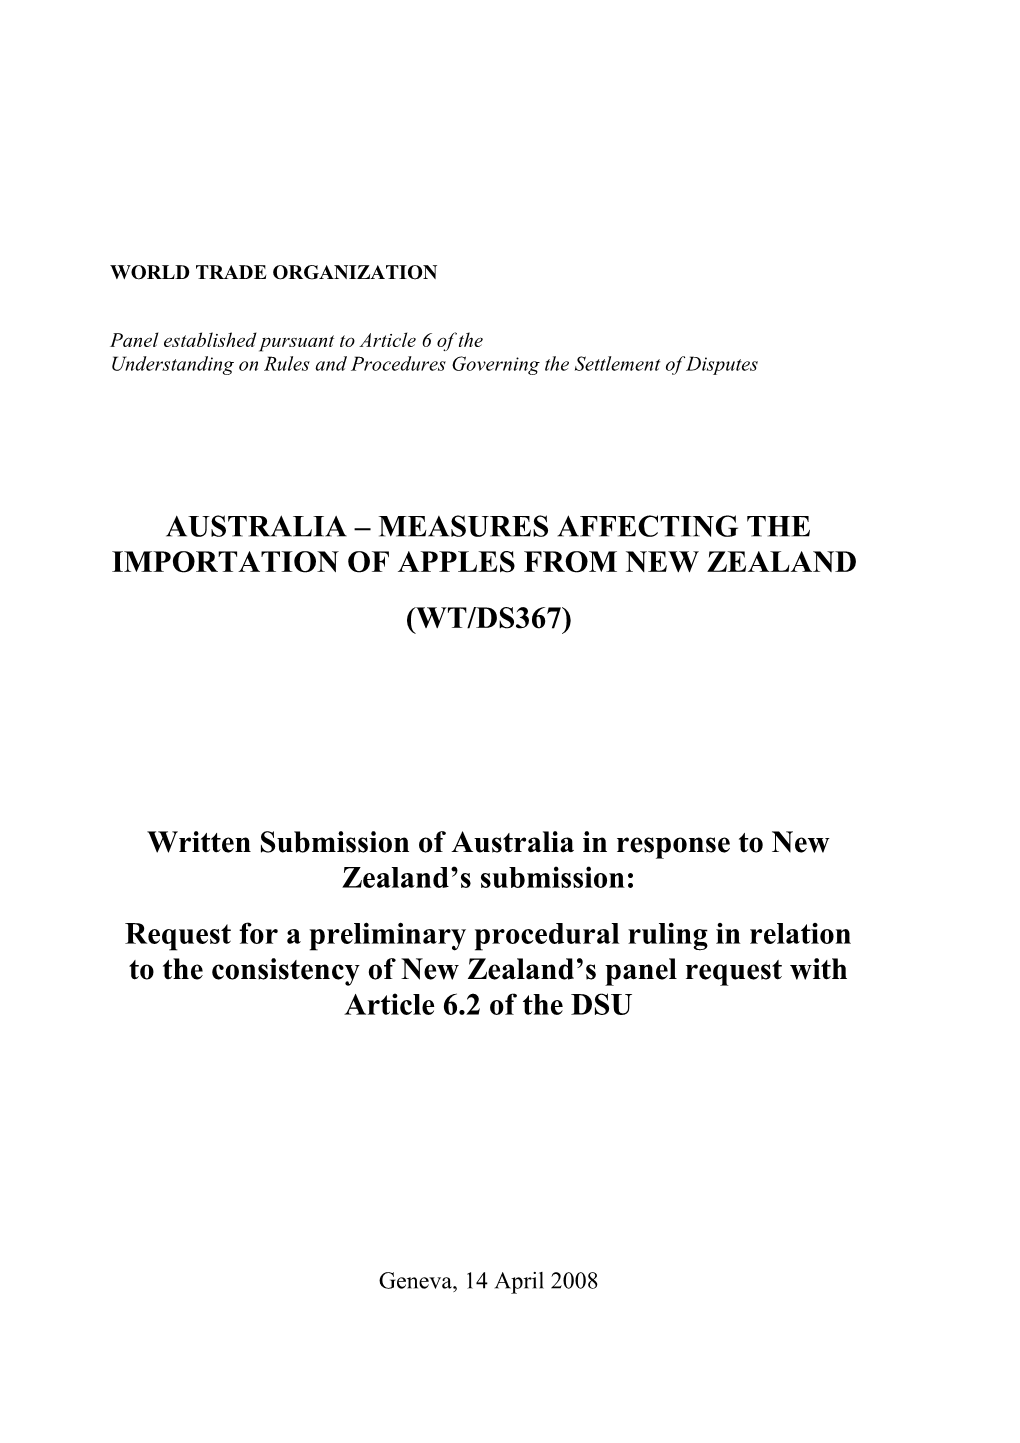 Australia – Measures Affecting The Importation Of Apples From New Zealand (Ds367)